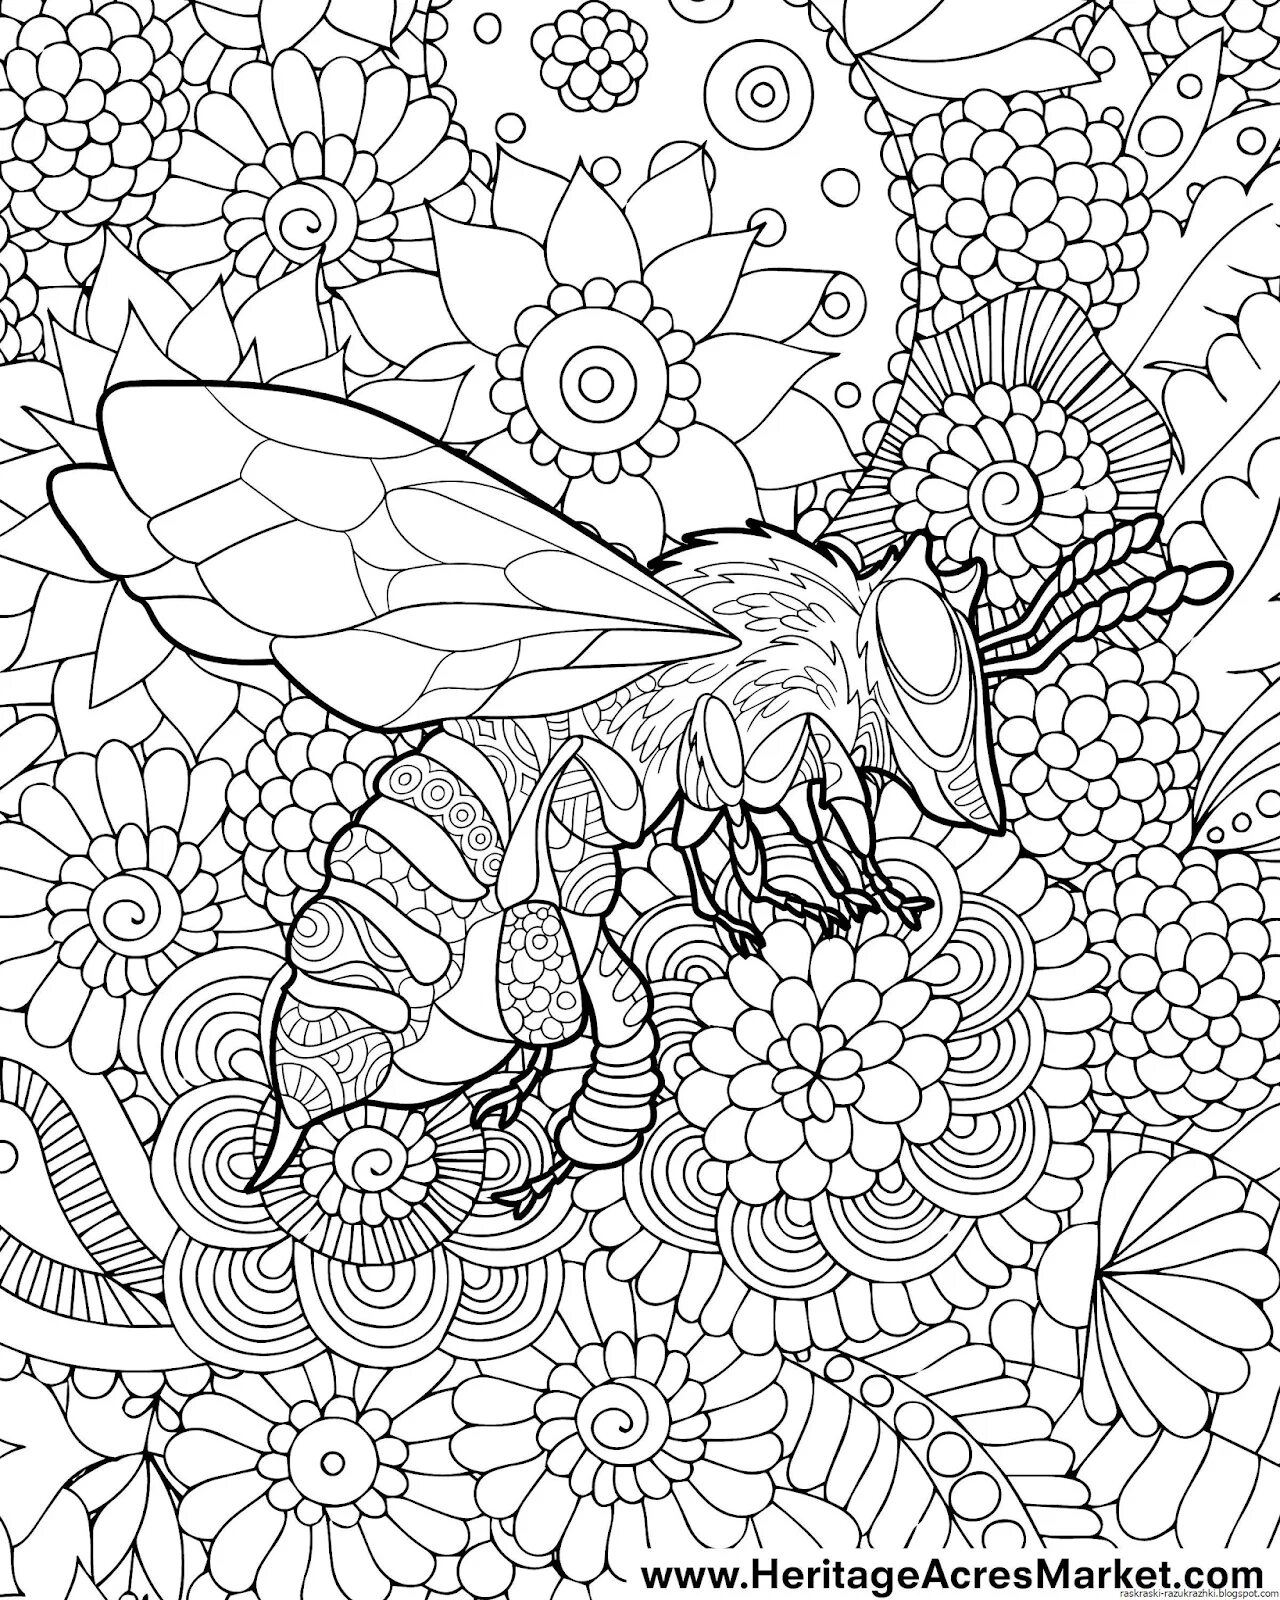 Energy anti-stress coloring book